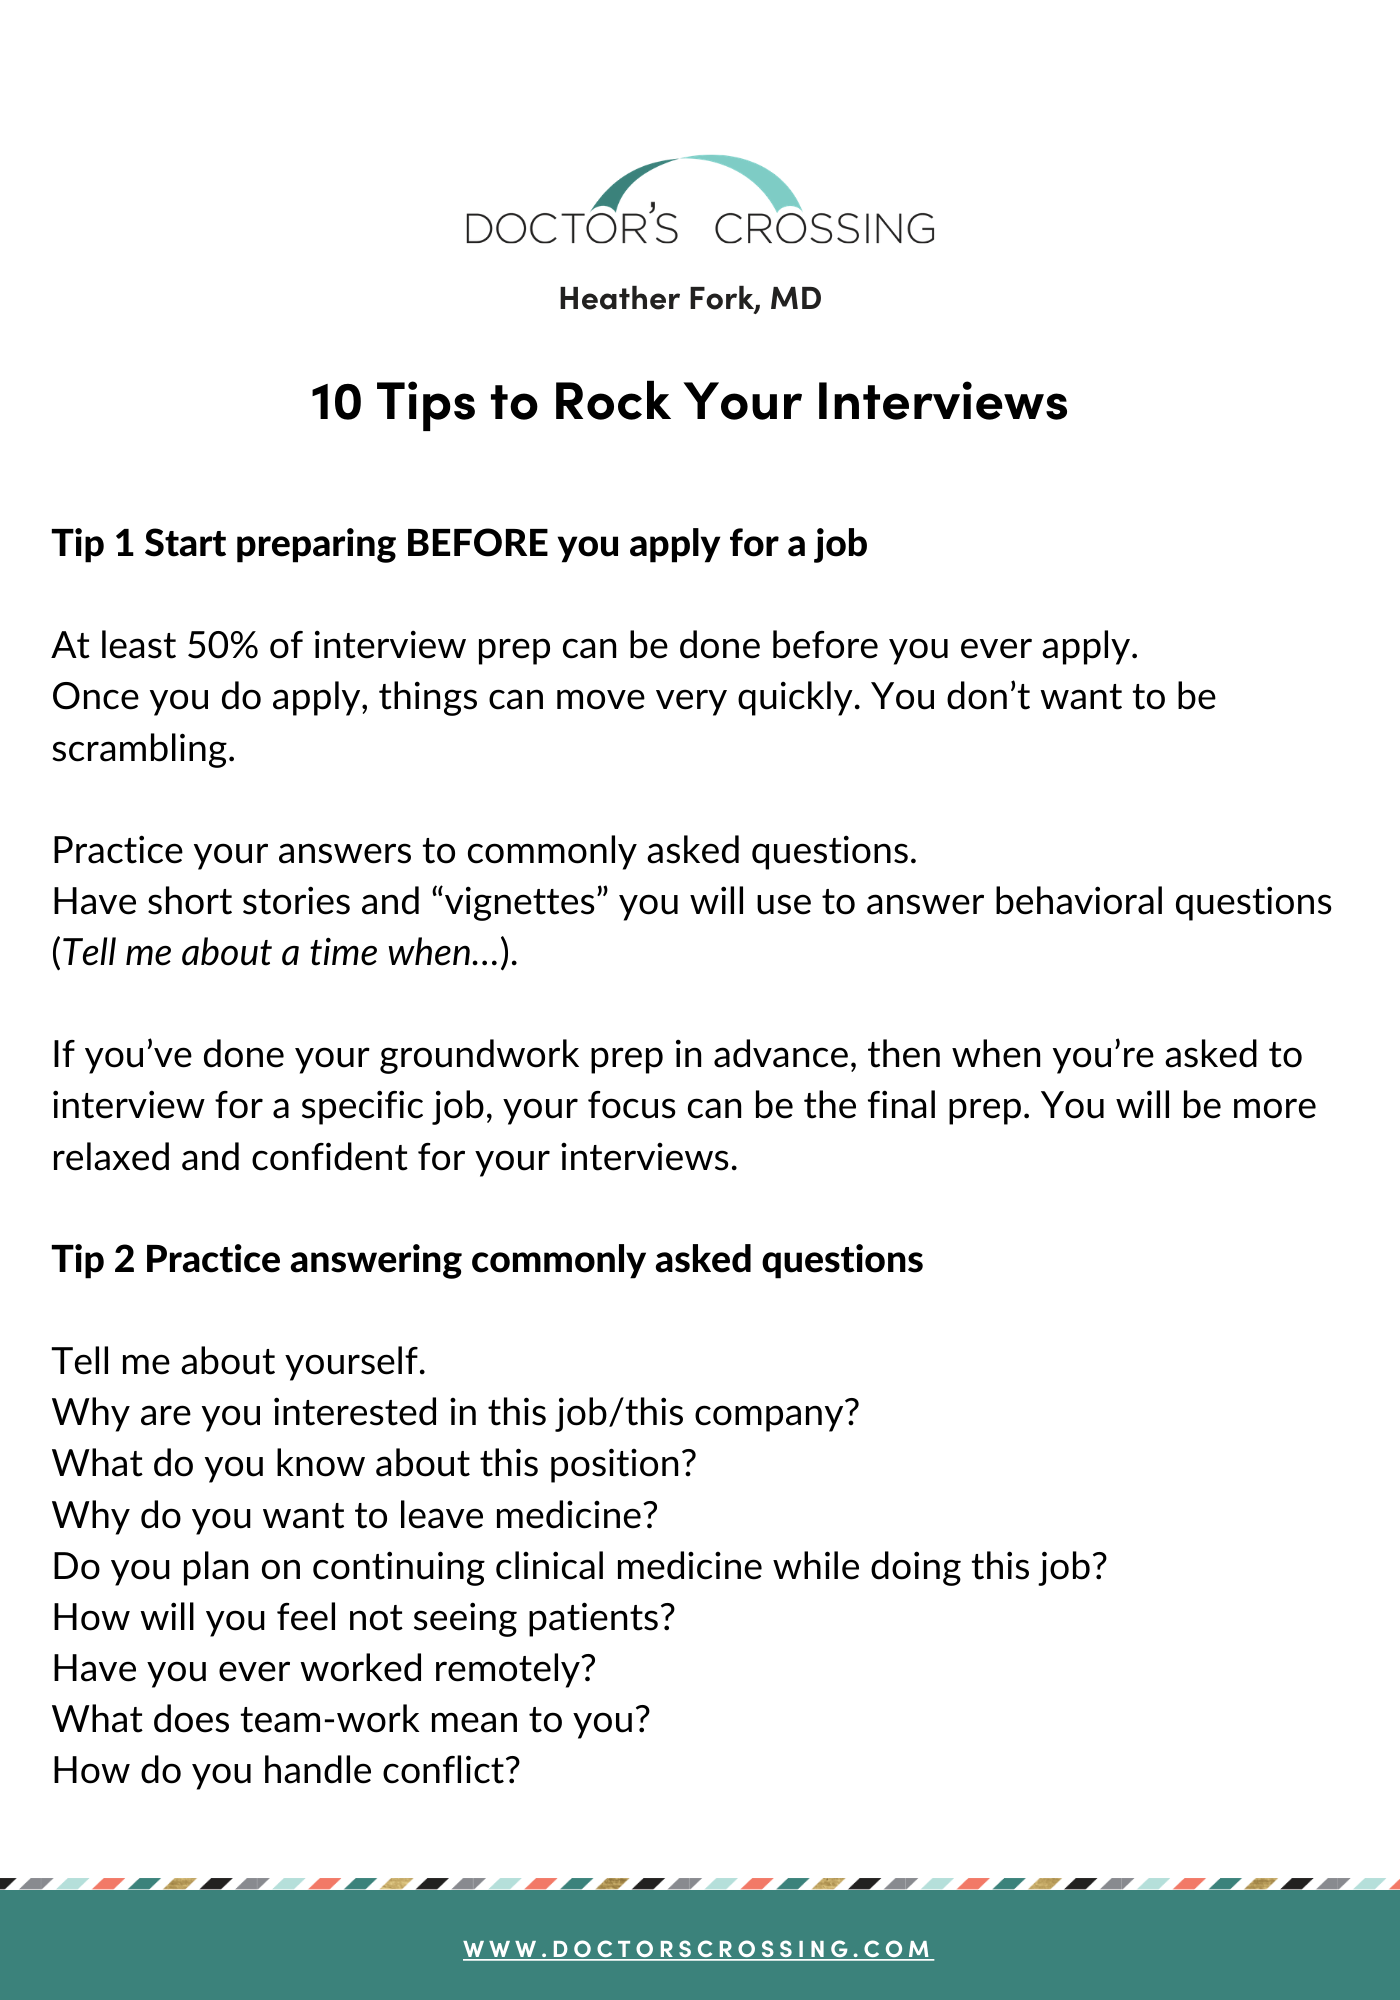 10 Tips to Rock Your Interviews